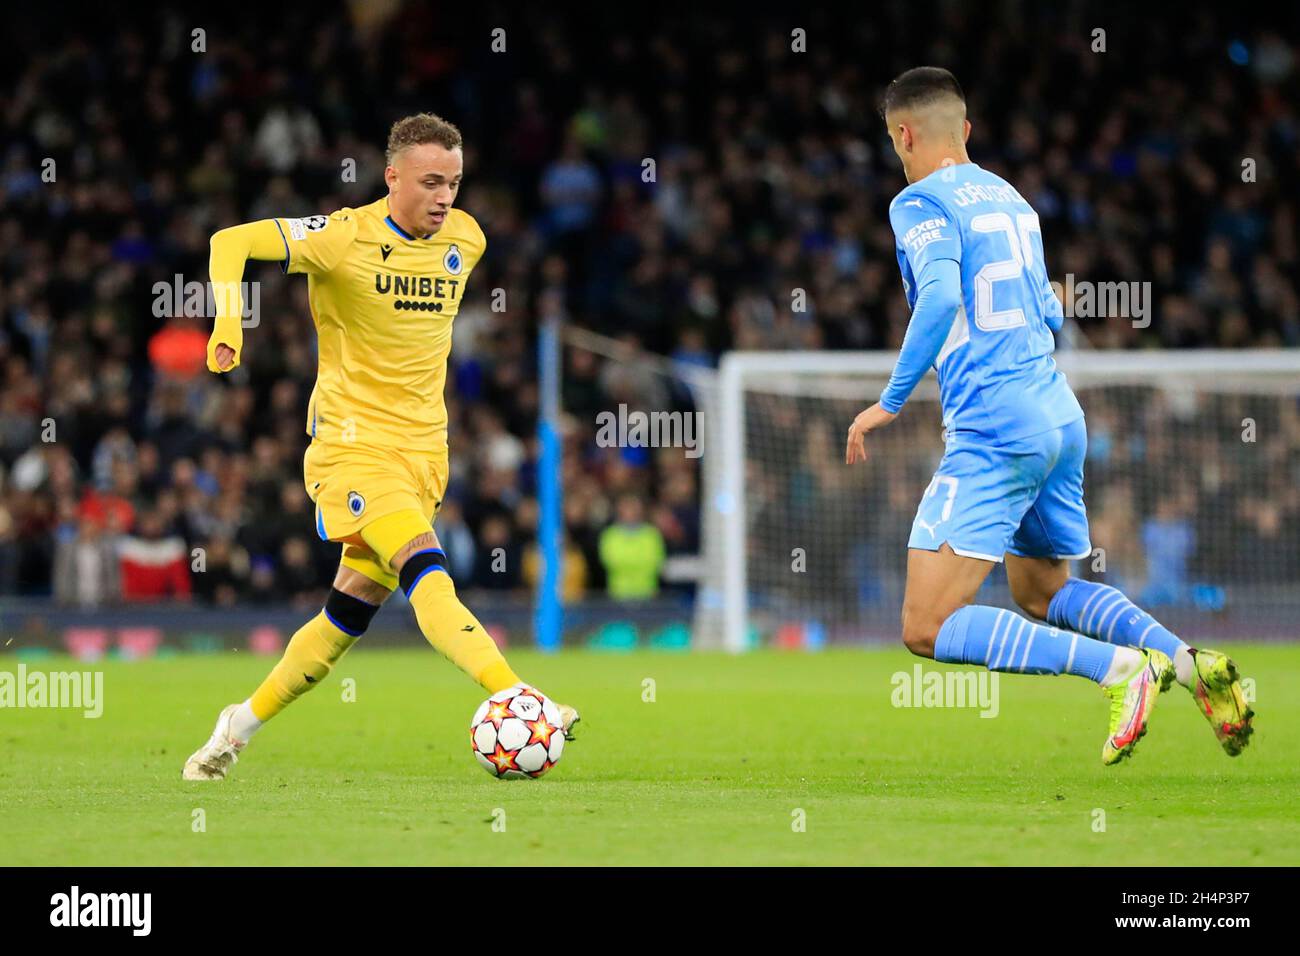 Manchester, UK. 03rd Nov, 2021. Noa Lang #10 of Club Brugge is confronted  by Joao Cancelo #27 of Manchester City in Manchester, United Kingdom on  11/3/2021. (Photo by Conor Molloy/News Images/Sipa USA)